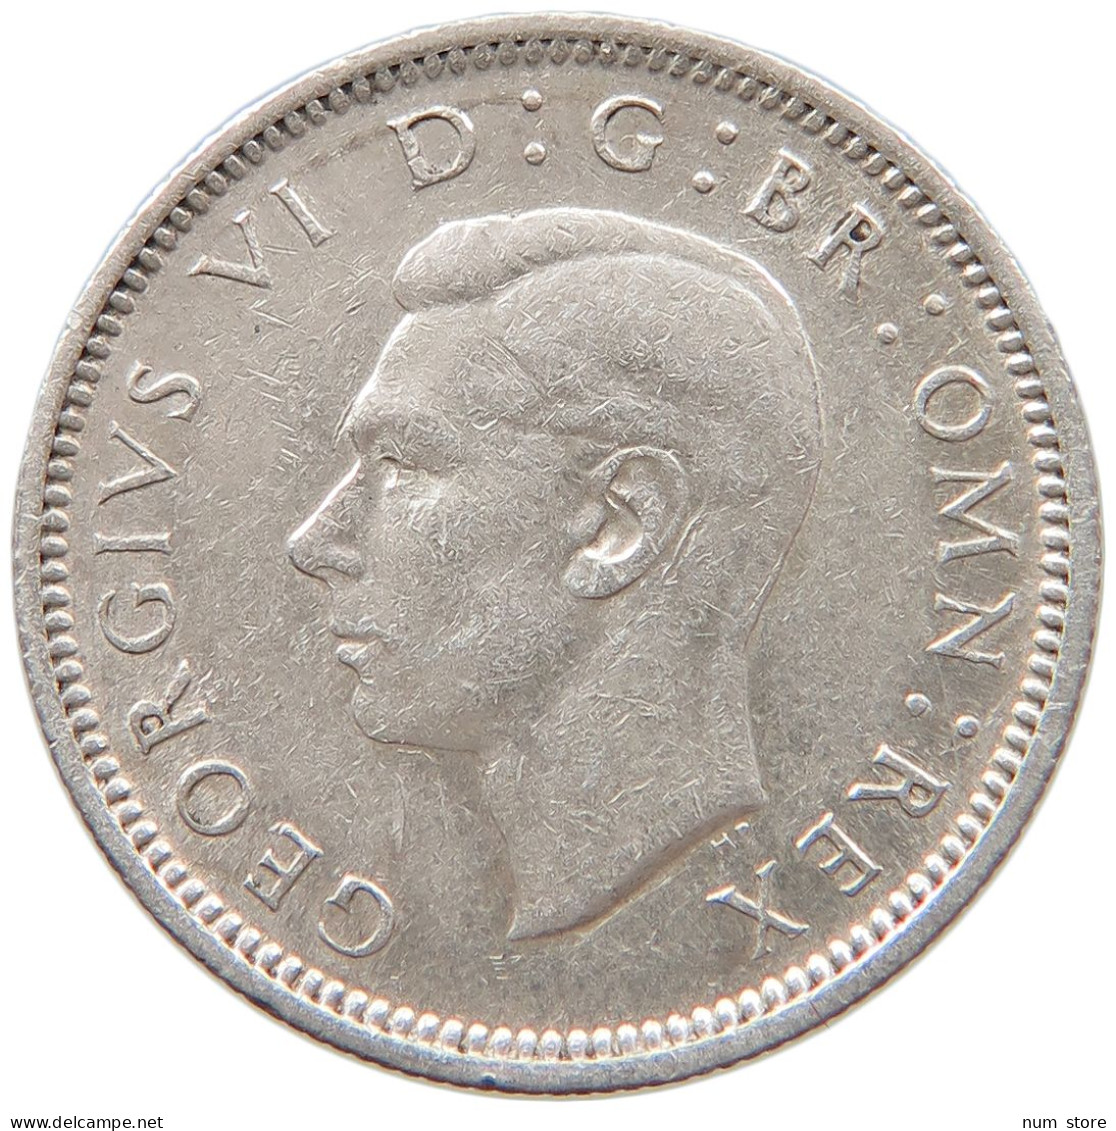 GREAT BRITAIN SIXPENCE 1944 #s020 0053 - H. 6 Pence